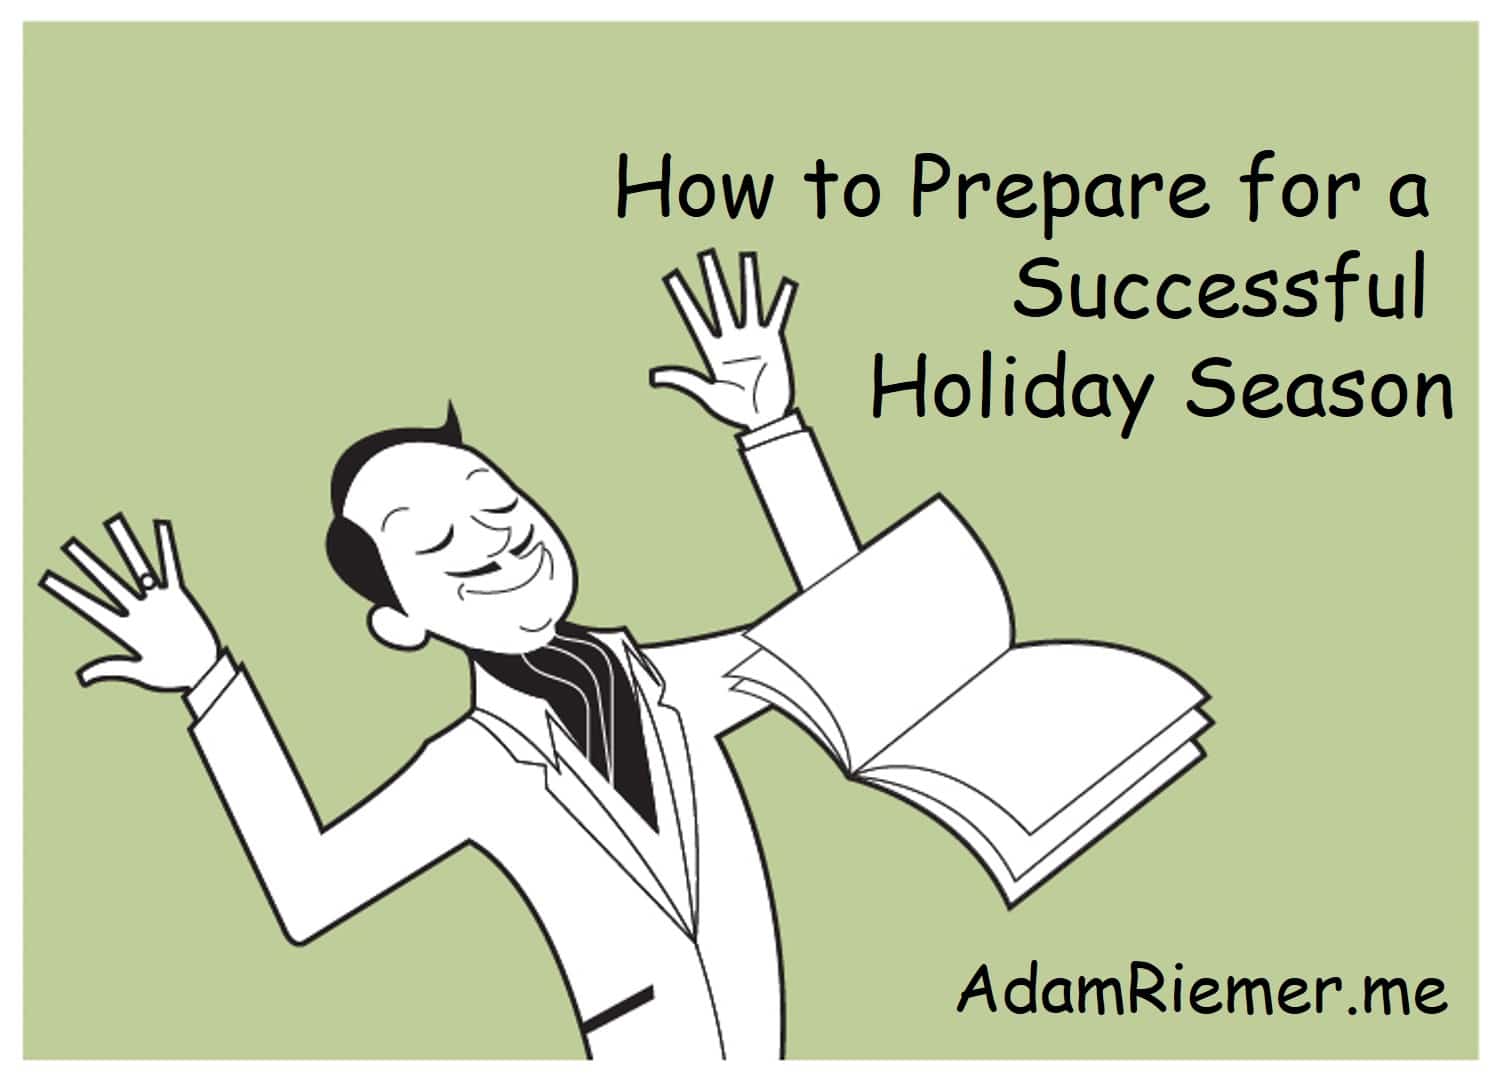 How to Prepare for a Successful Holiday Season